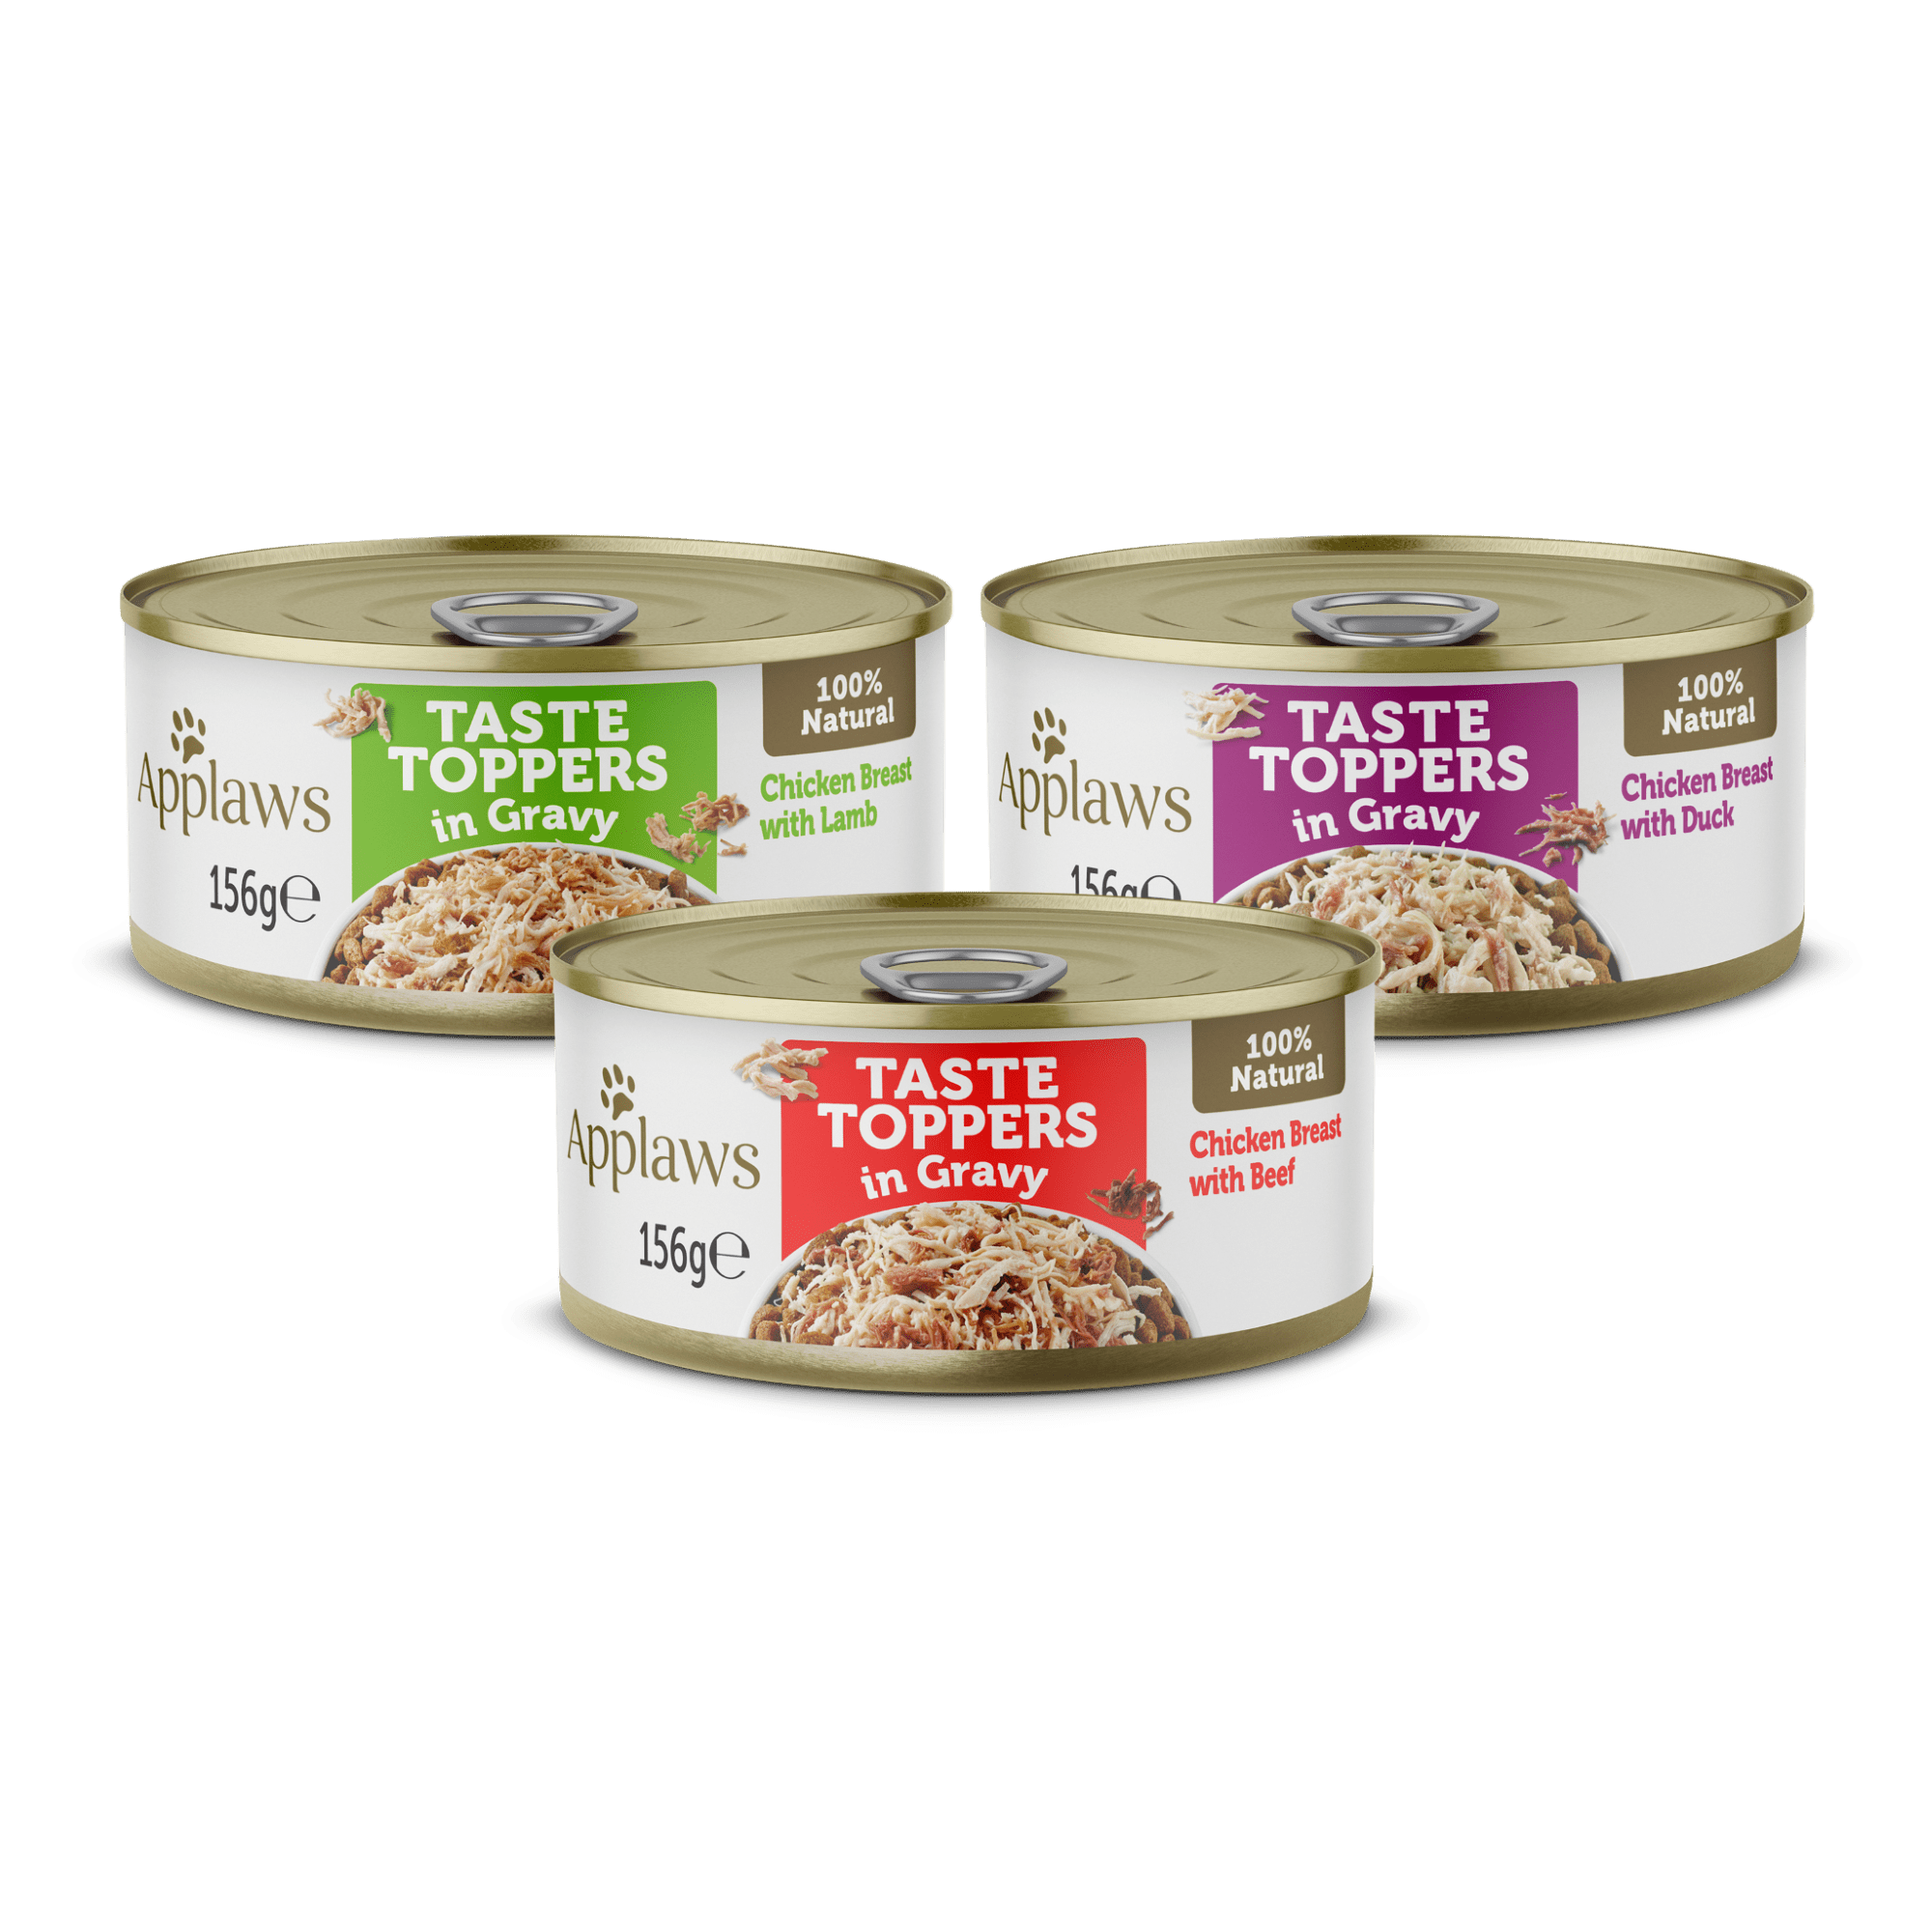 Applaws Taste Toppers Gravy Selection Tin 4x (8x156g), Applaws,